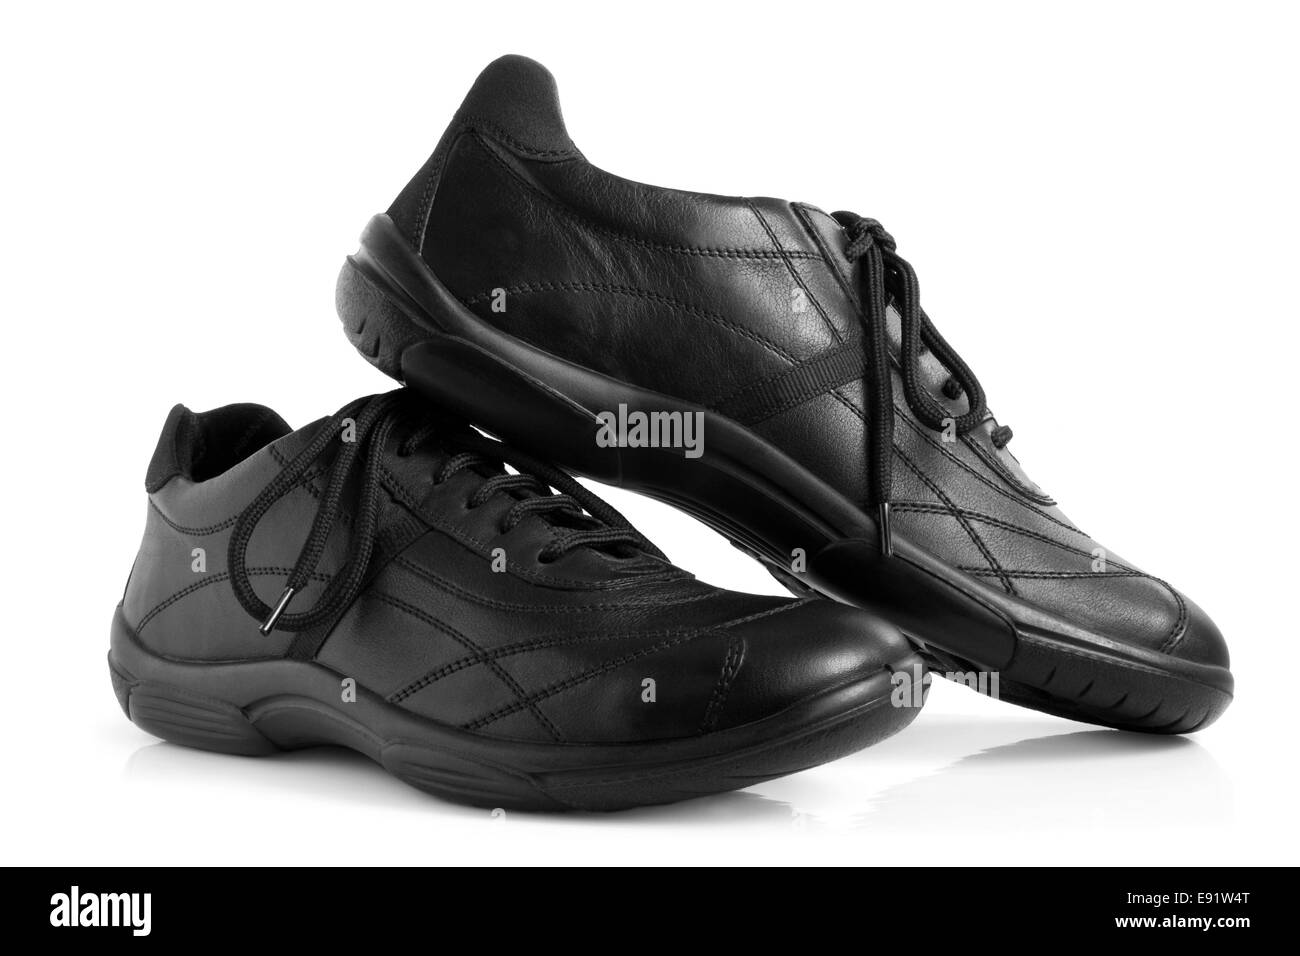 Lace up shoes Black and White Stock Photos & Images - Alamy